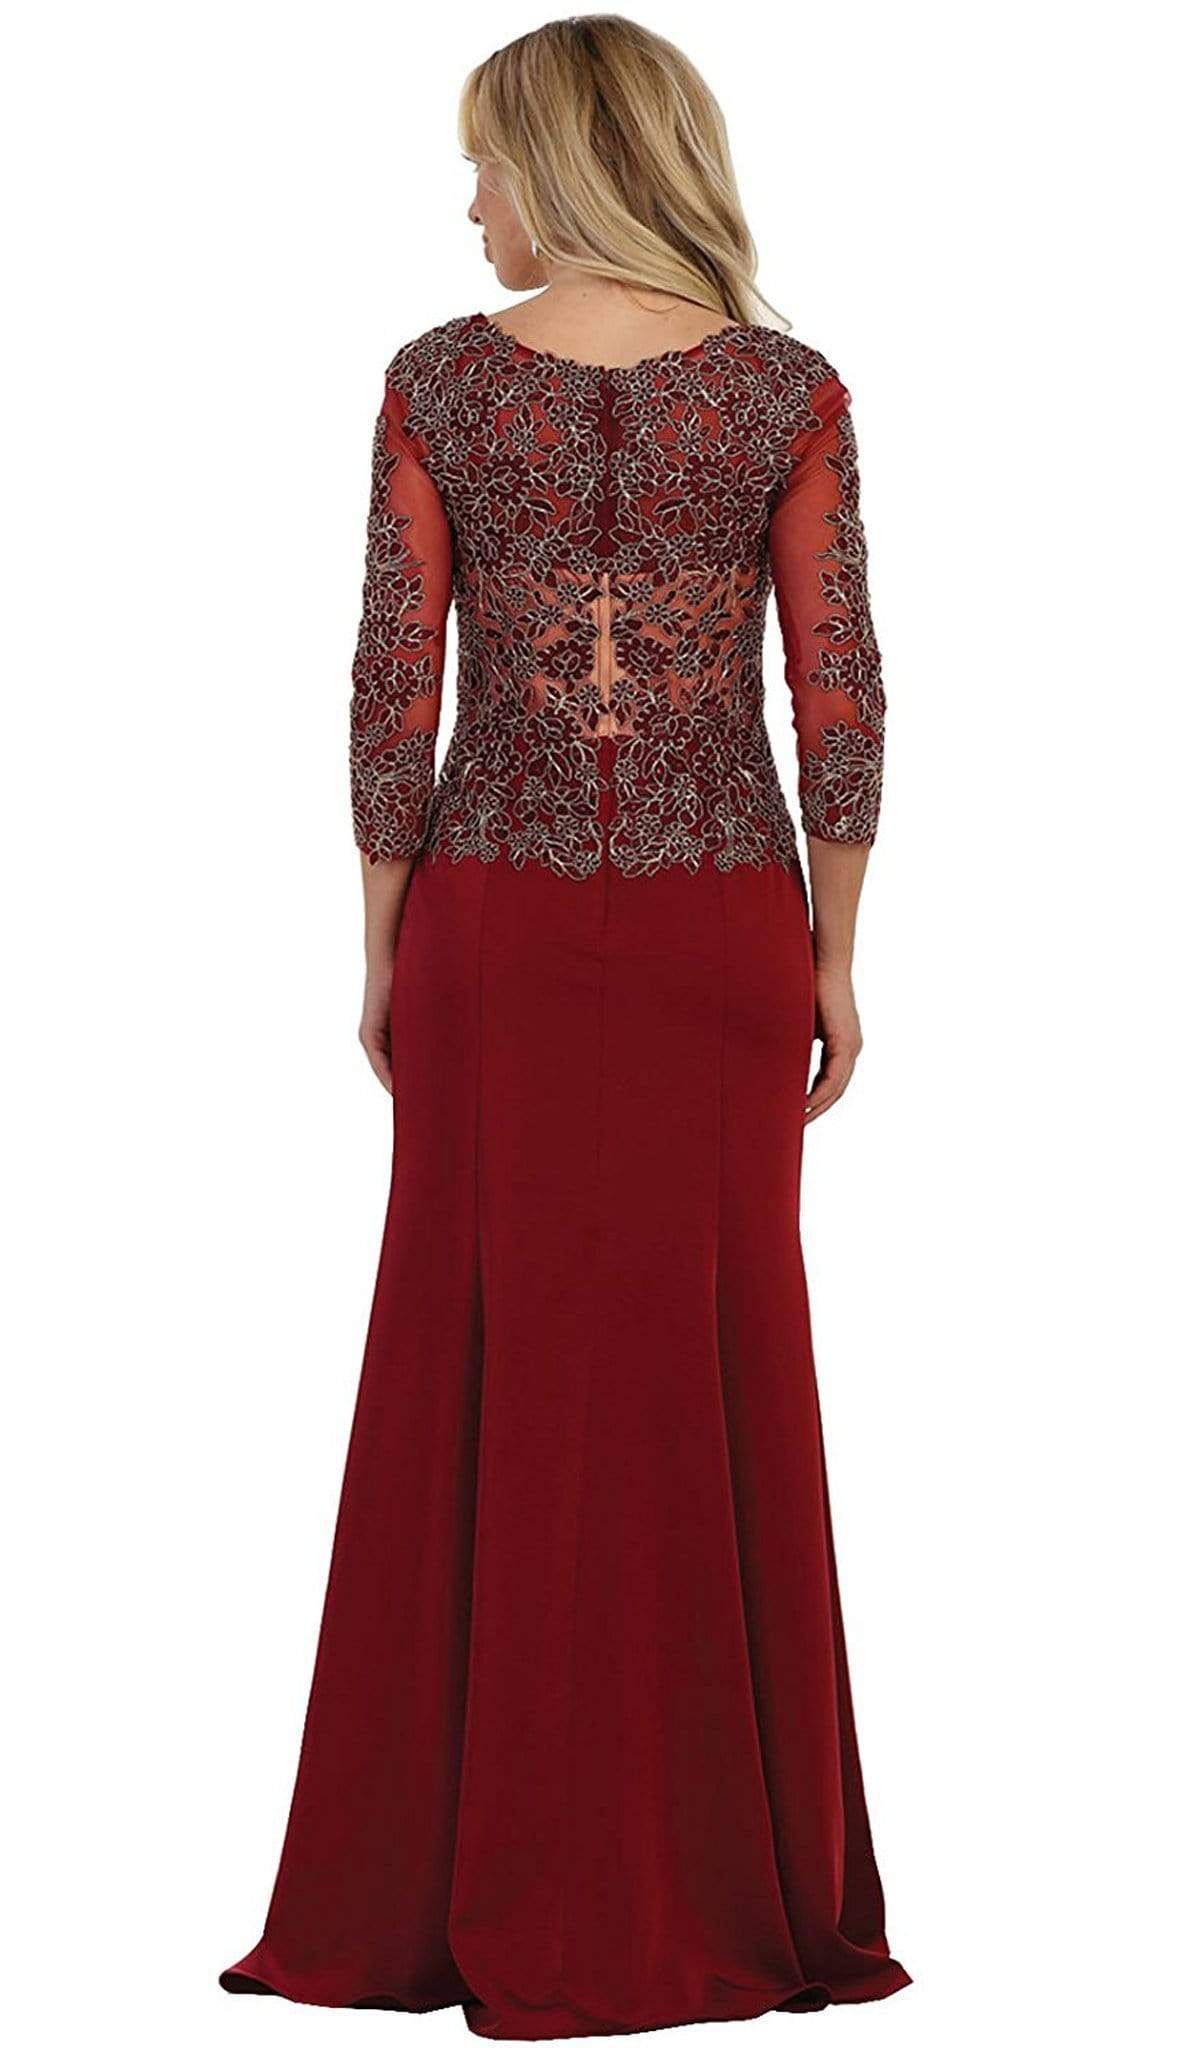 May Queen - MQ1505 Quarter Length Sleeve Lace Sheath Evening Dress Mother of the Bride Dresses